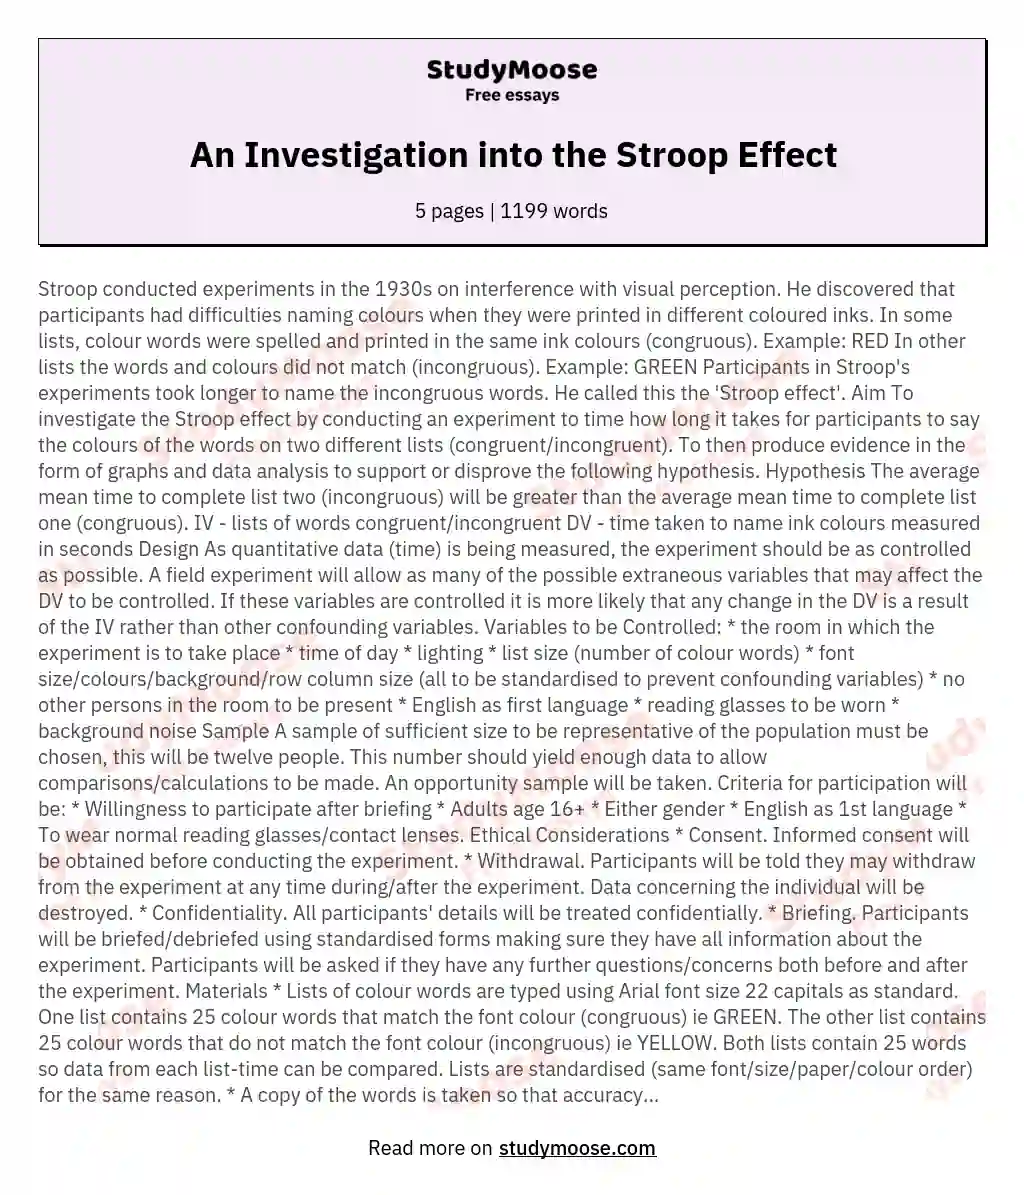 An Investigation into the Stroop Effect essay